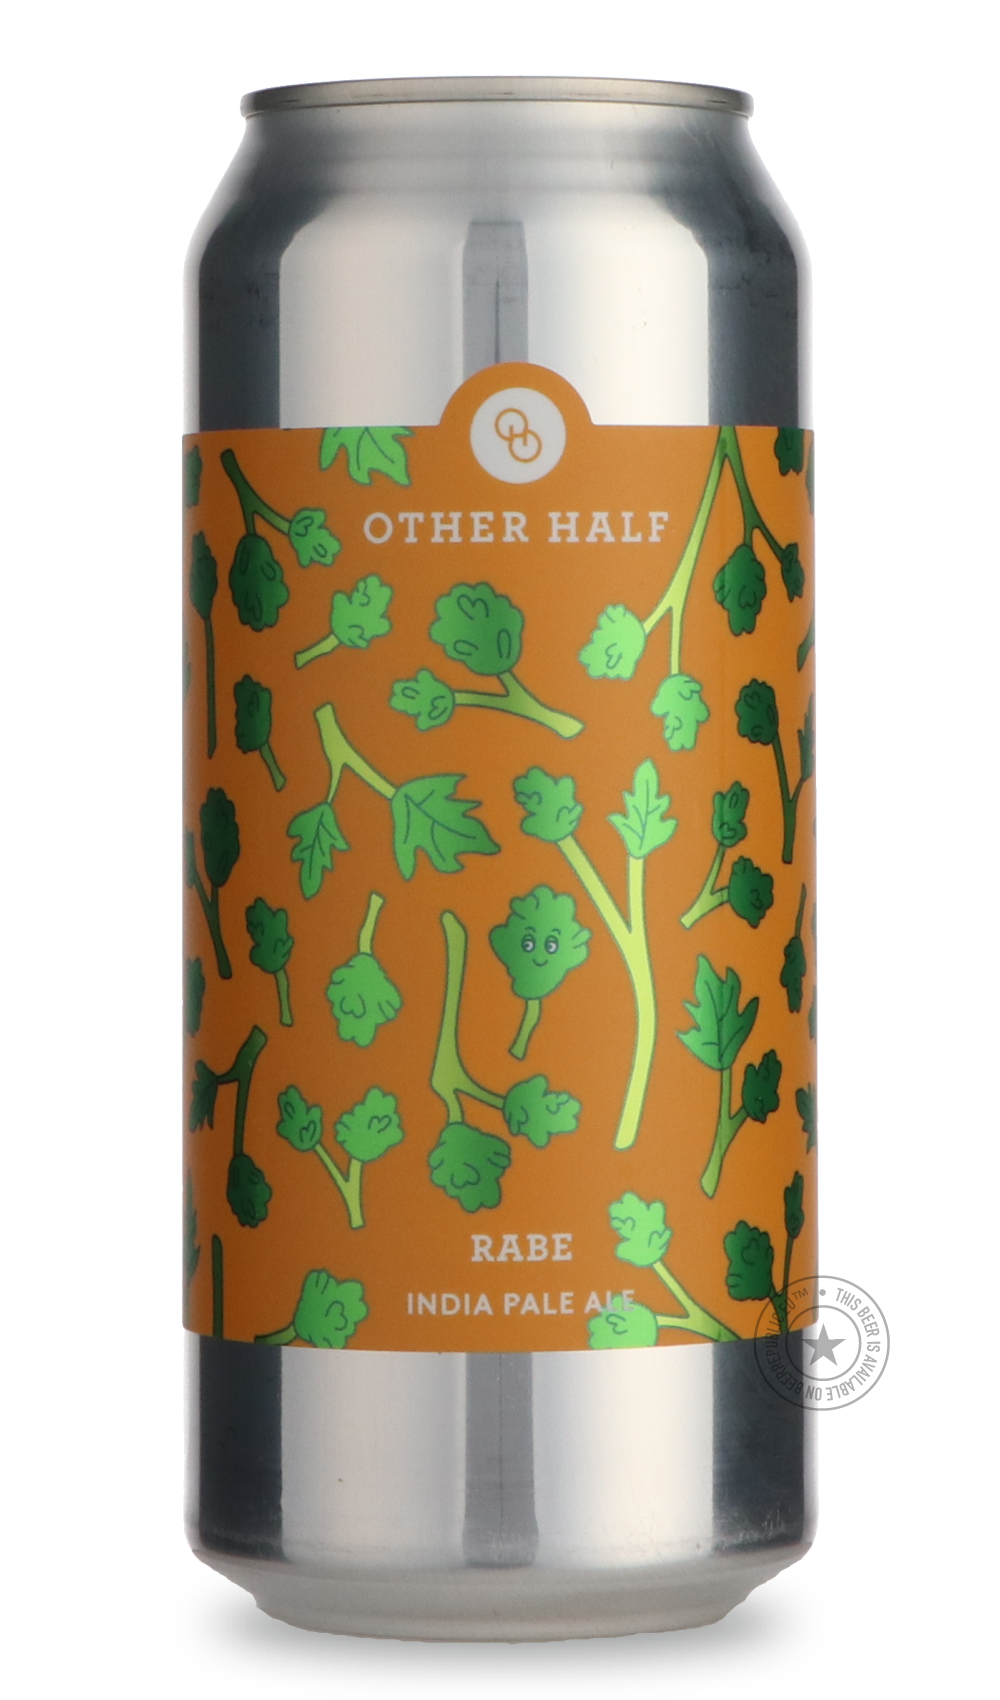 -Other Half- Rabe-IPA- Only @ Beer Republic - The best online beer store for American & Canadian craft beer - Buy beer online from the USA and Canada - Bier online kopen - Amerikaans bier kopen - Craft beer store - Craft beer kopen - Amerikanisch bier kaufen - Bier online kaufen - Acheter biere online - IPA - Stout - Porter - New England IPA - Hazy IPA - Imperial Stout - Barrel Aged - Barrel Aged Imperial Stout - Brown - Dark beer - Blond - Blonde - Pilsner - Lager - Wheat - Weizen - Amber - Barley Wine - Q